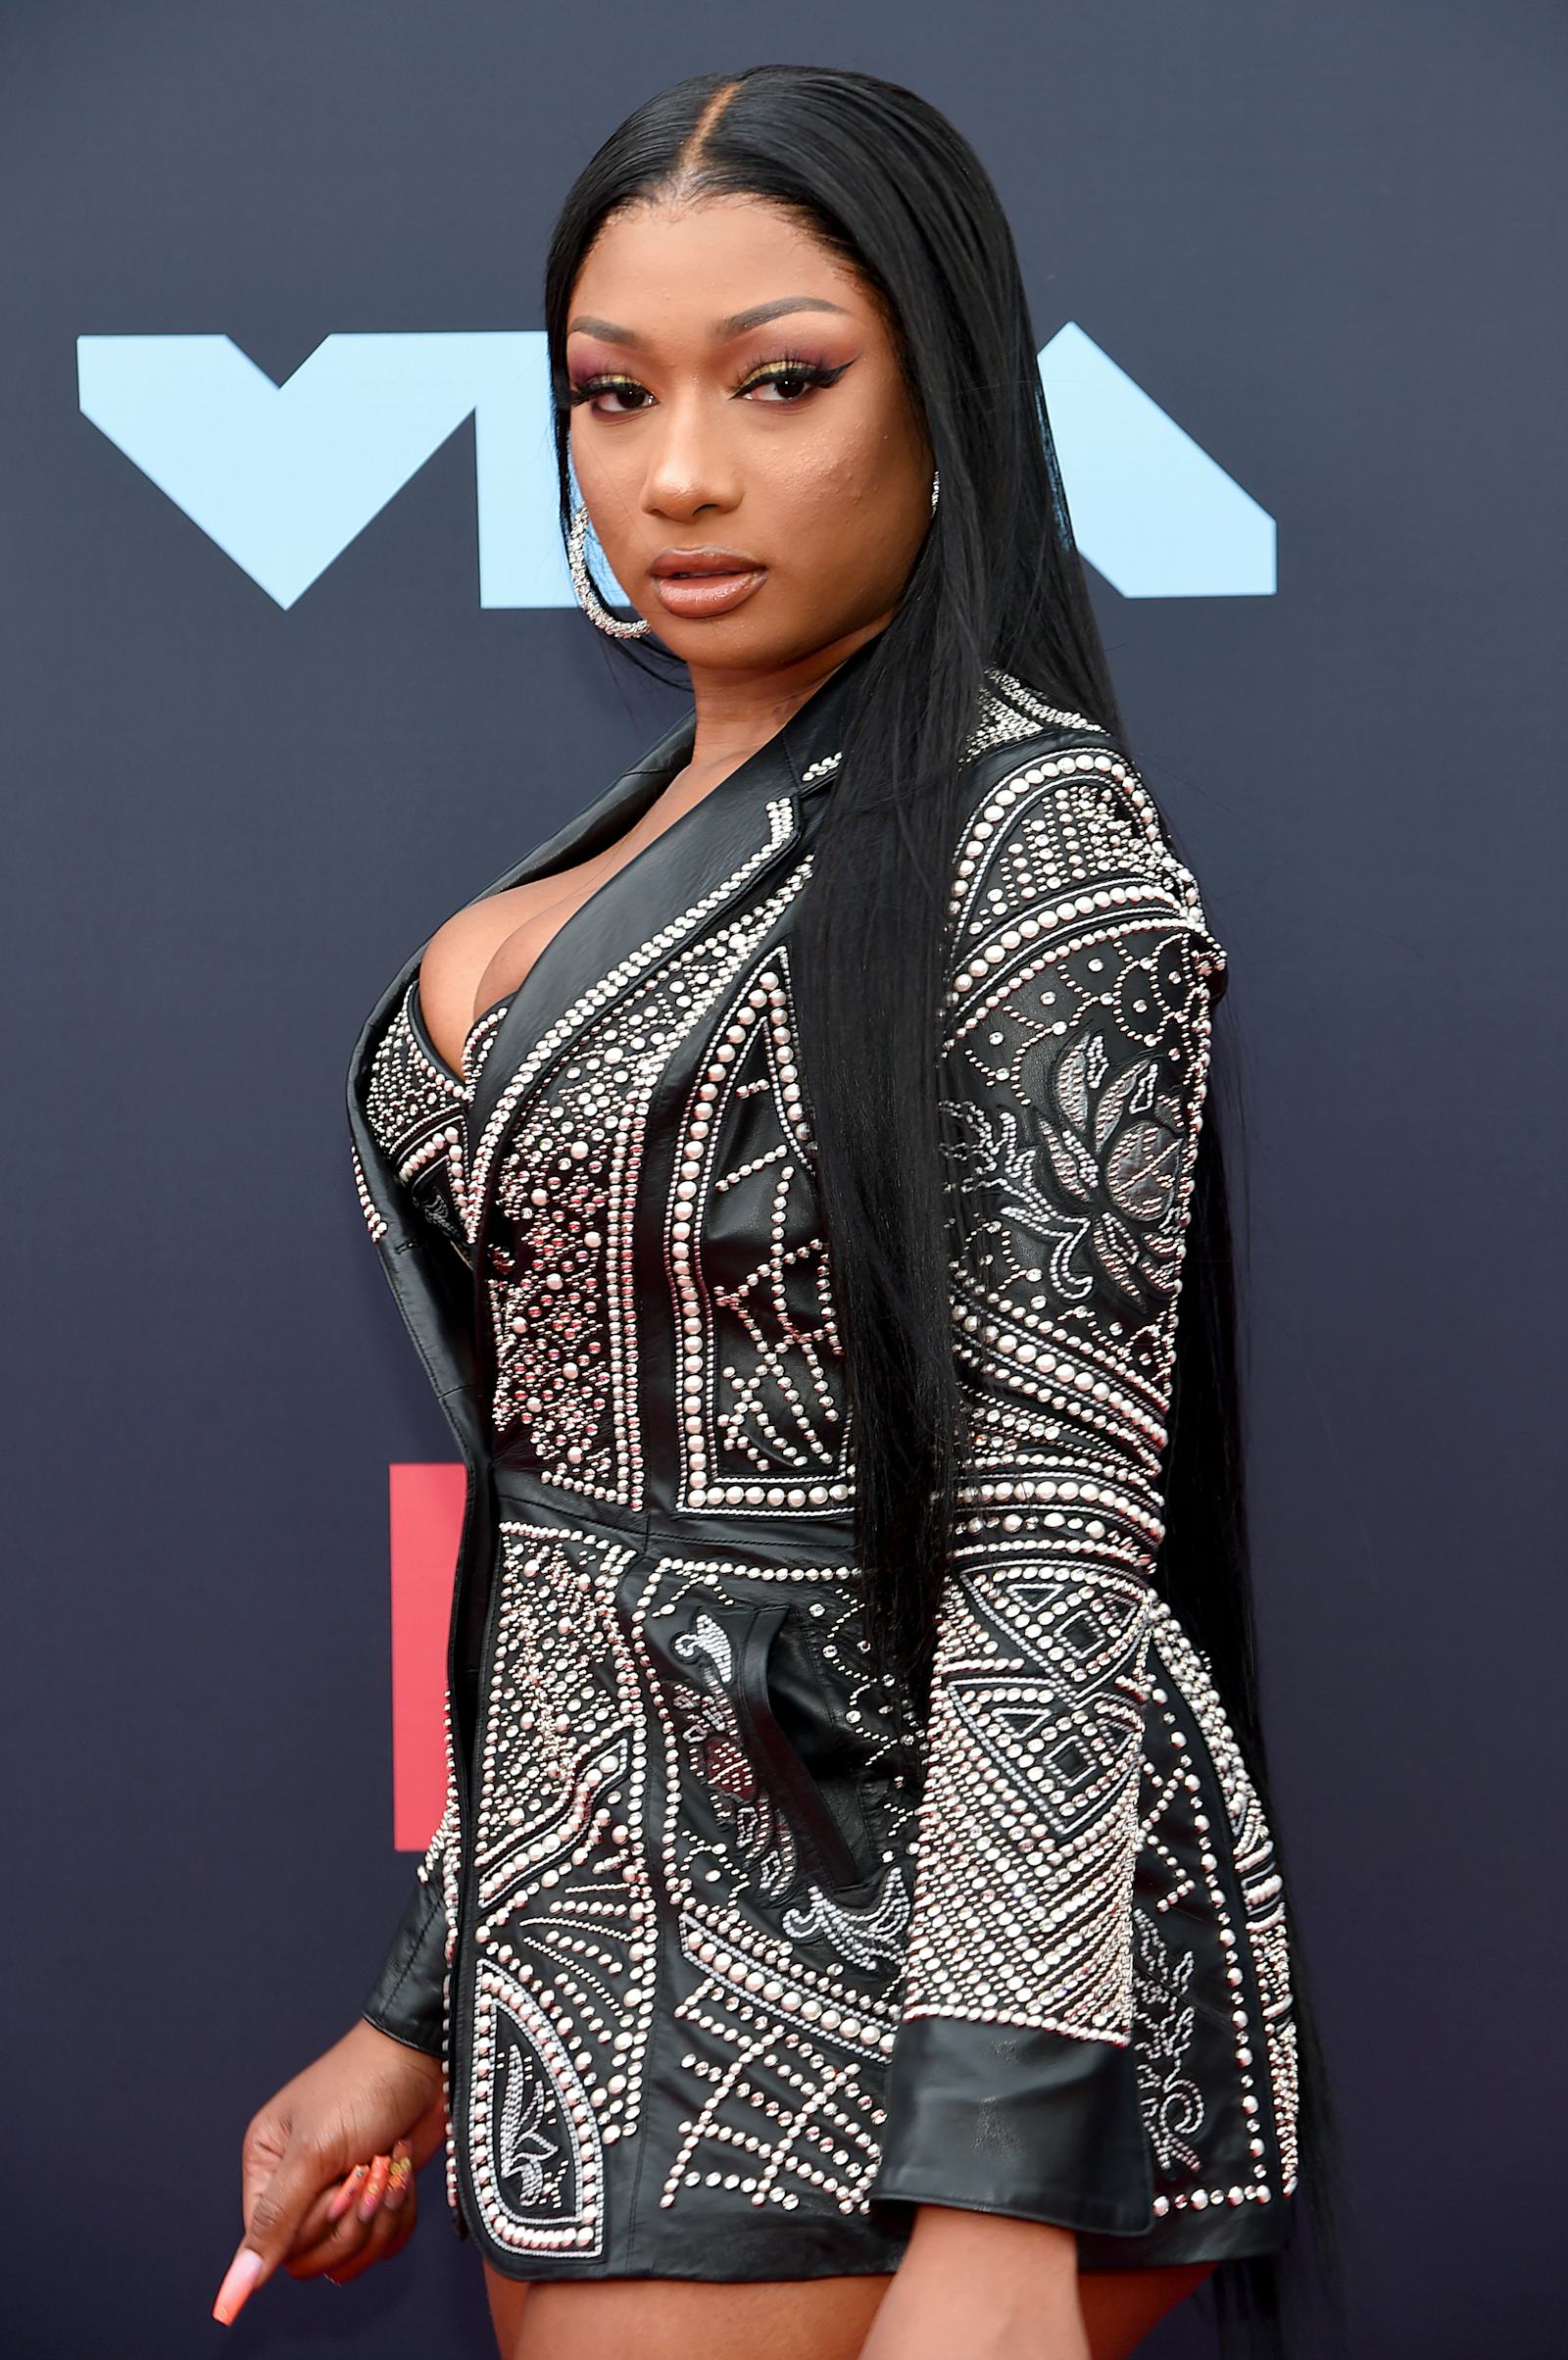 Megan Thee Stallion's 2019 VMA Red Carpet Outfits Brought ALL The Fever